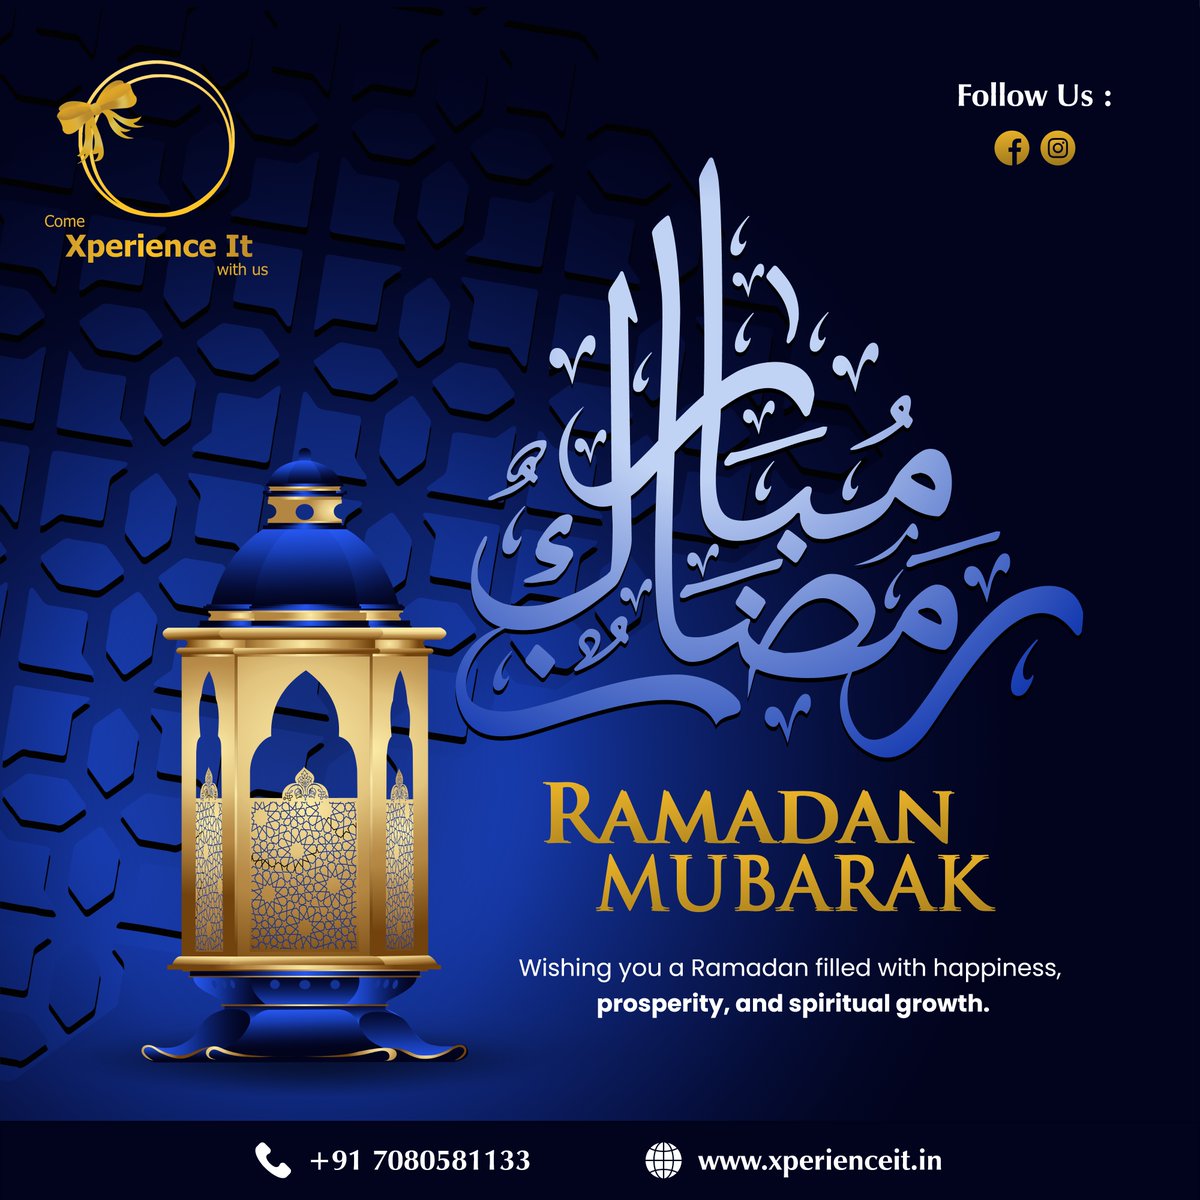 'Ramadan Mubarak to all my beloved followers! May this holy month bring you peace, blessings, and countless reasons to smile. Let's cherish this time of fasting, reflection, and spiritual growth. #RamadanKareem #SpiritualGrowth #islam #muslim #ramadan #ramadanmubarak